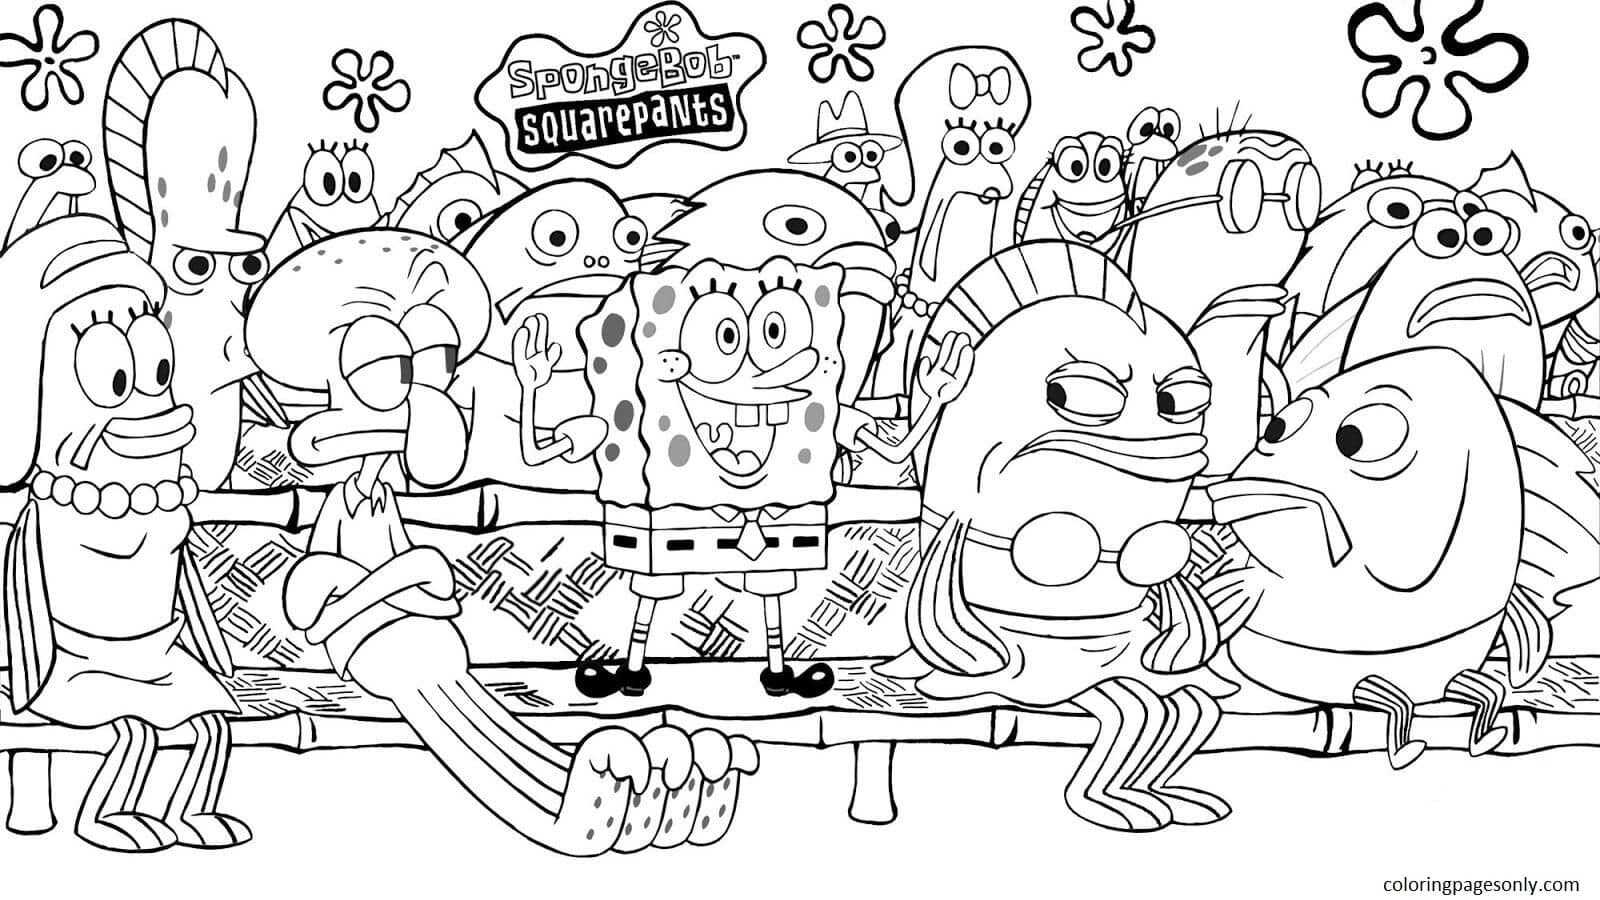 Spongebob And Friends Coloring Page